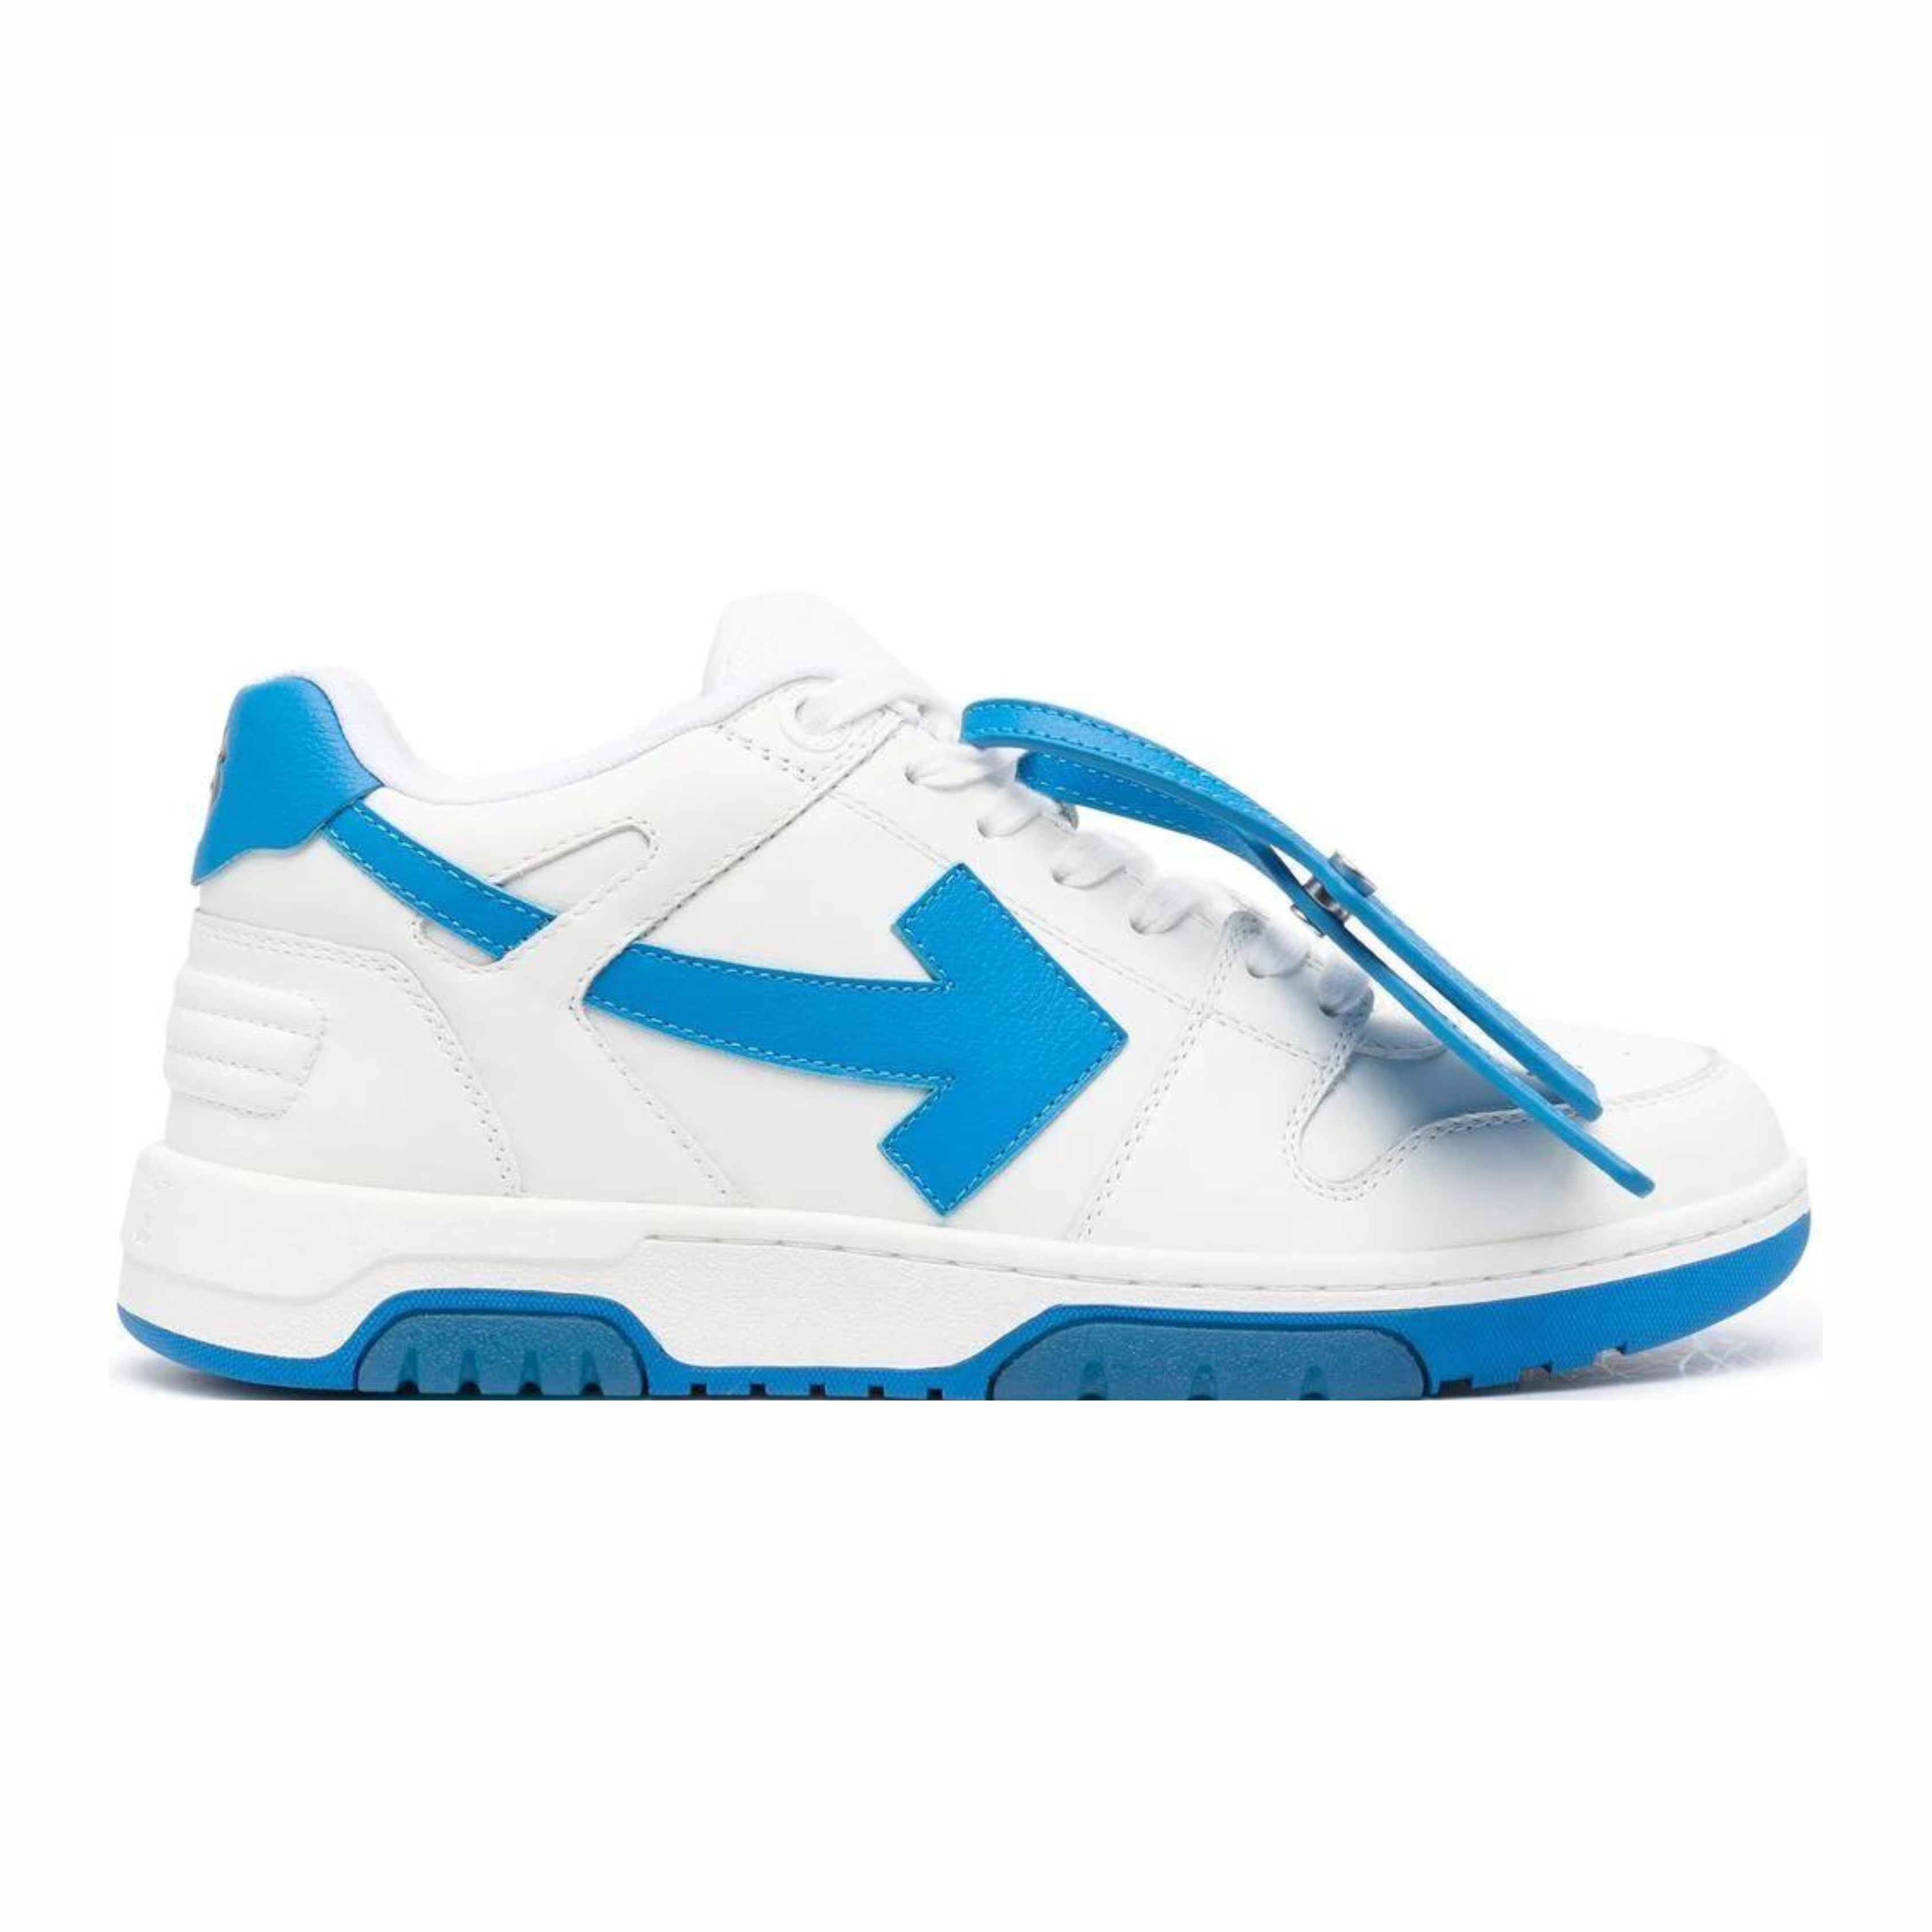 Off-White Out Of Office "OOO" Low White Blue (FW21)